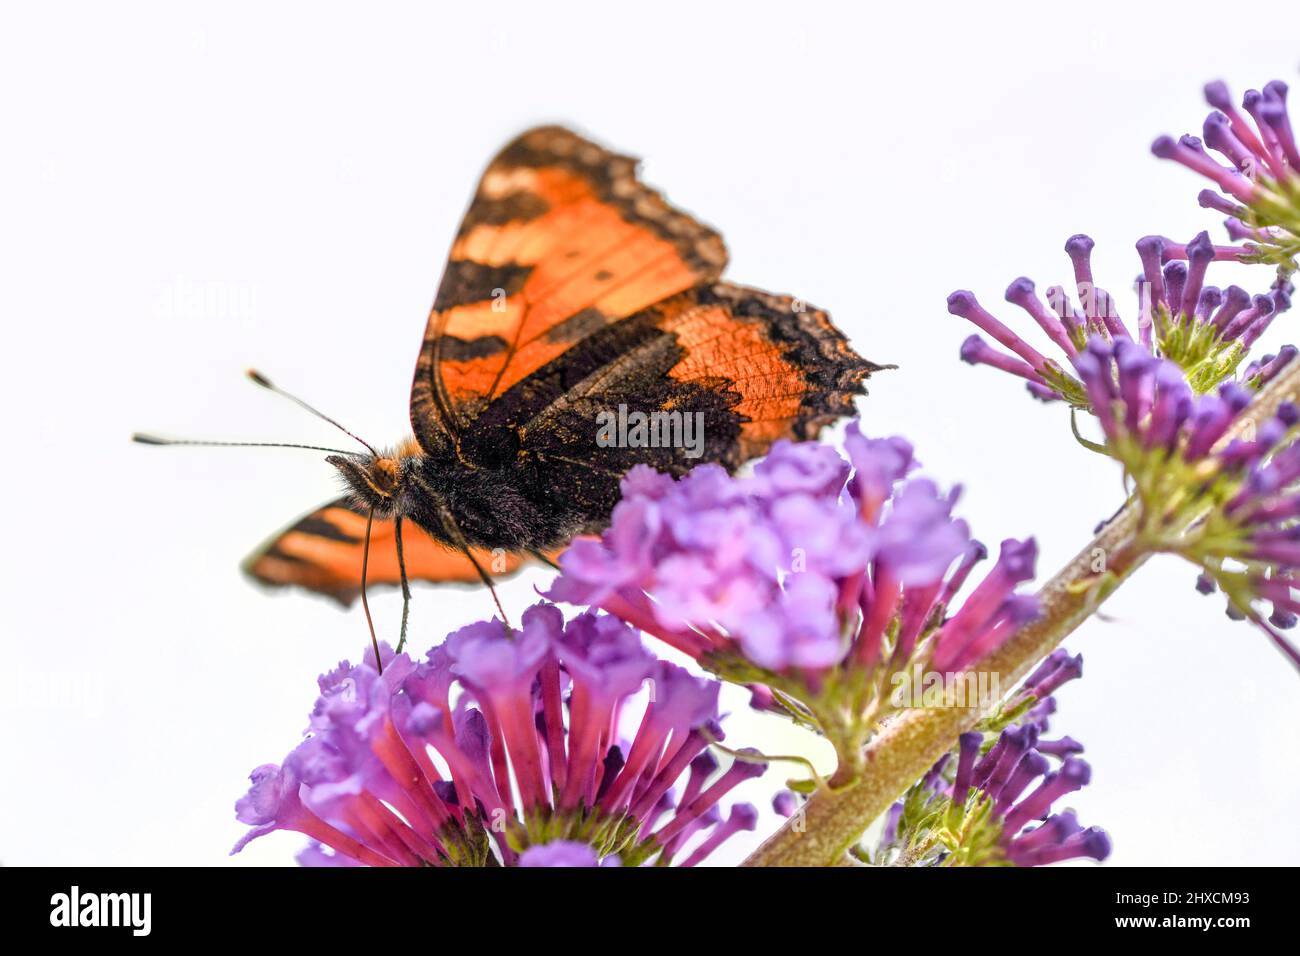 Aglais urticae, Small fox, Butterfly, Nymphalidae, Noble butterfly Stock Photo